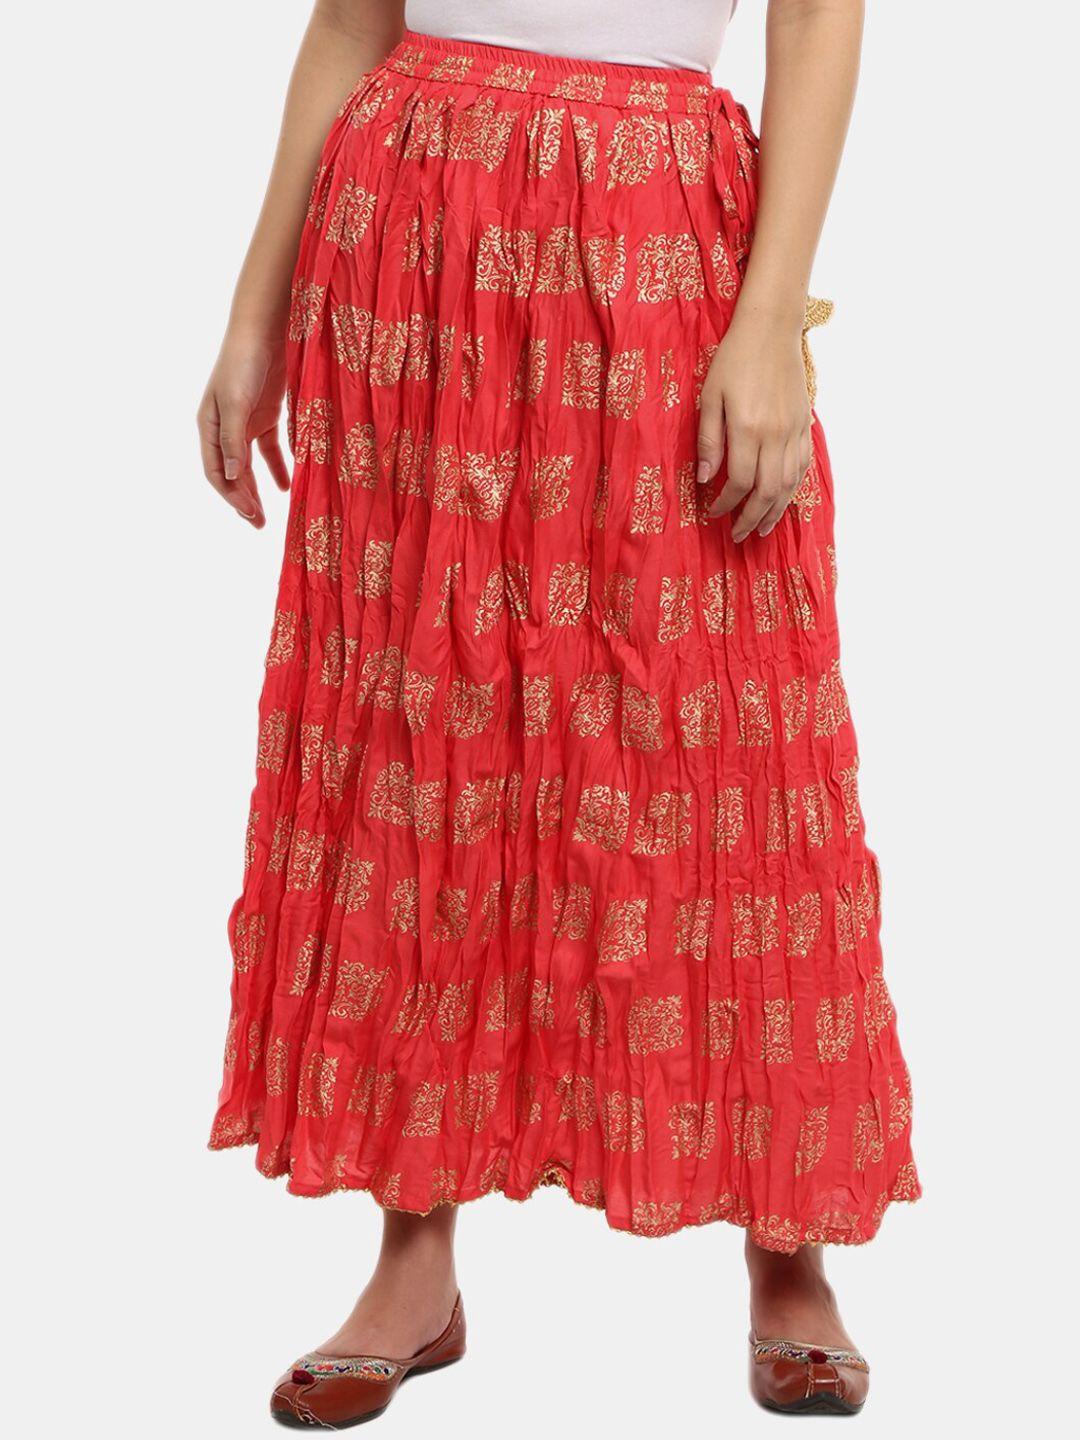 v-mart women red-colored & silver-toned printed flared maxi skirt